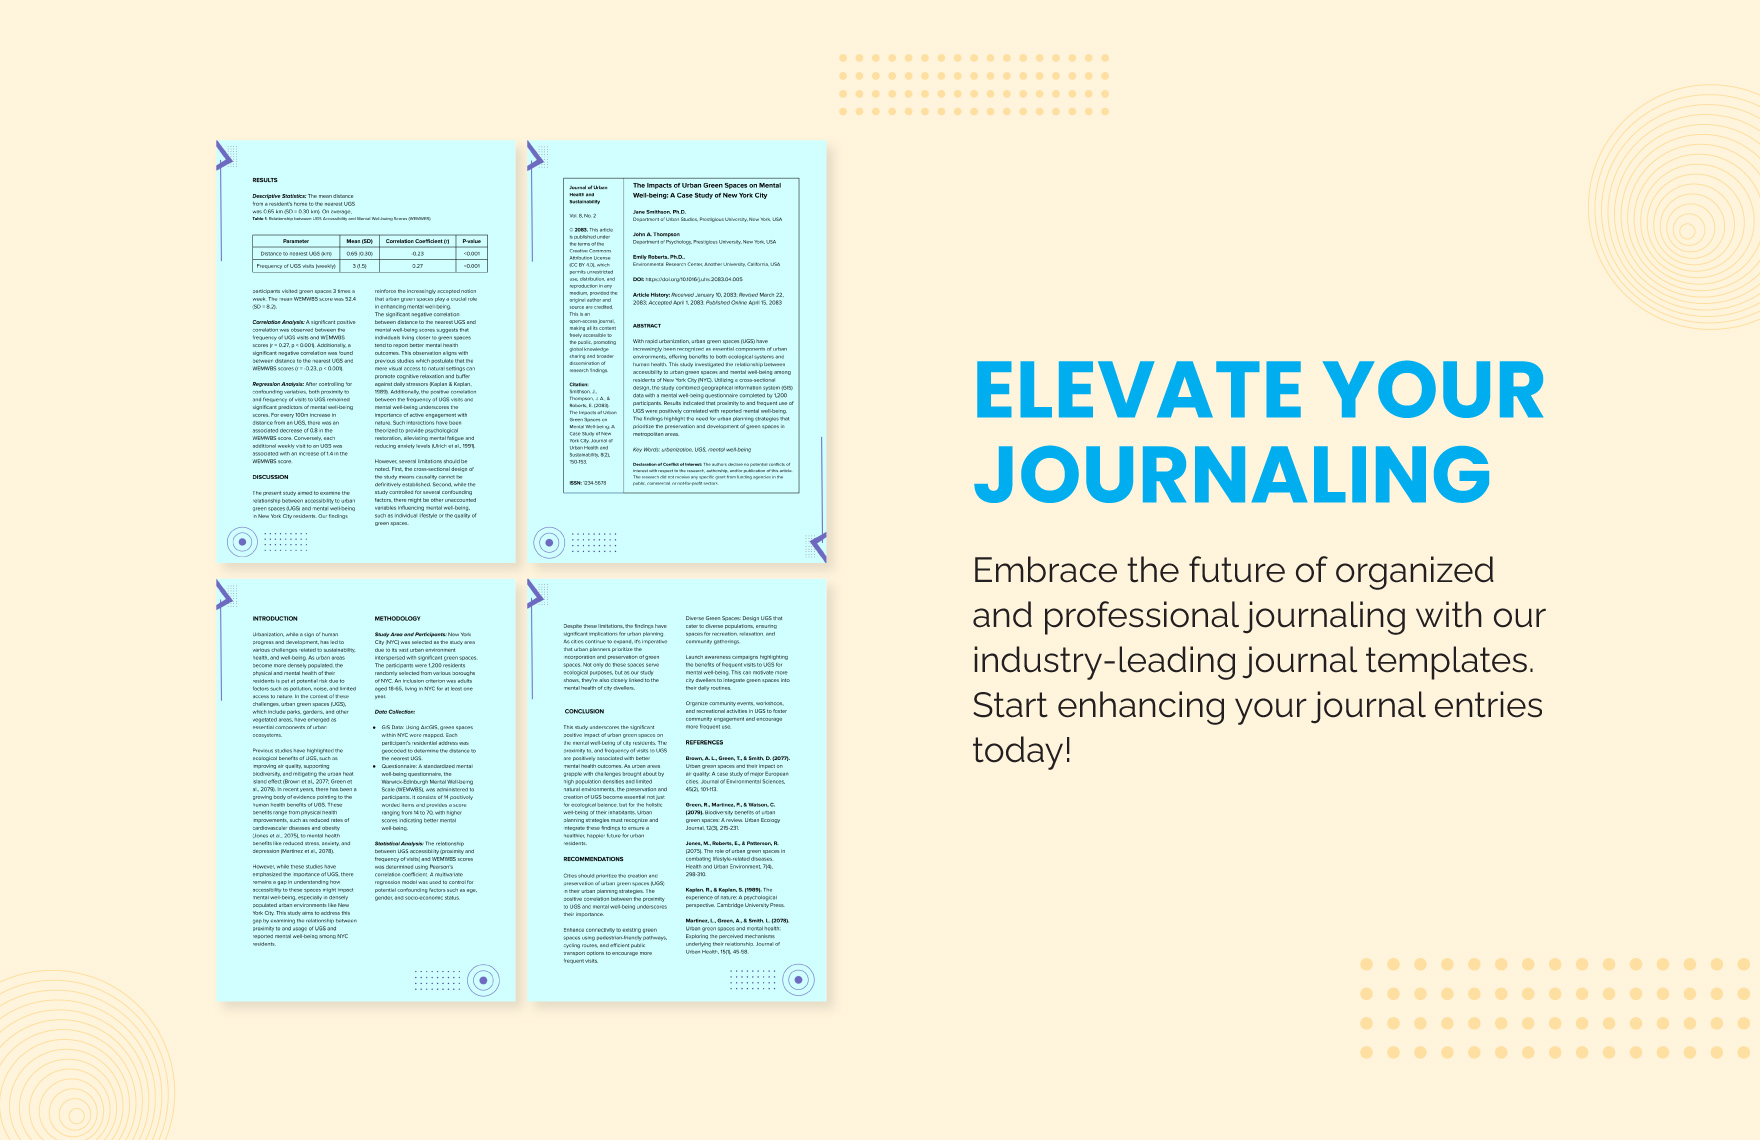 Journal Article Template